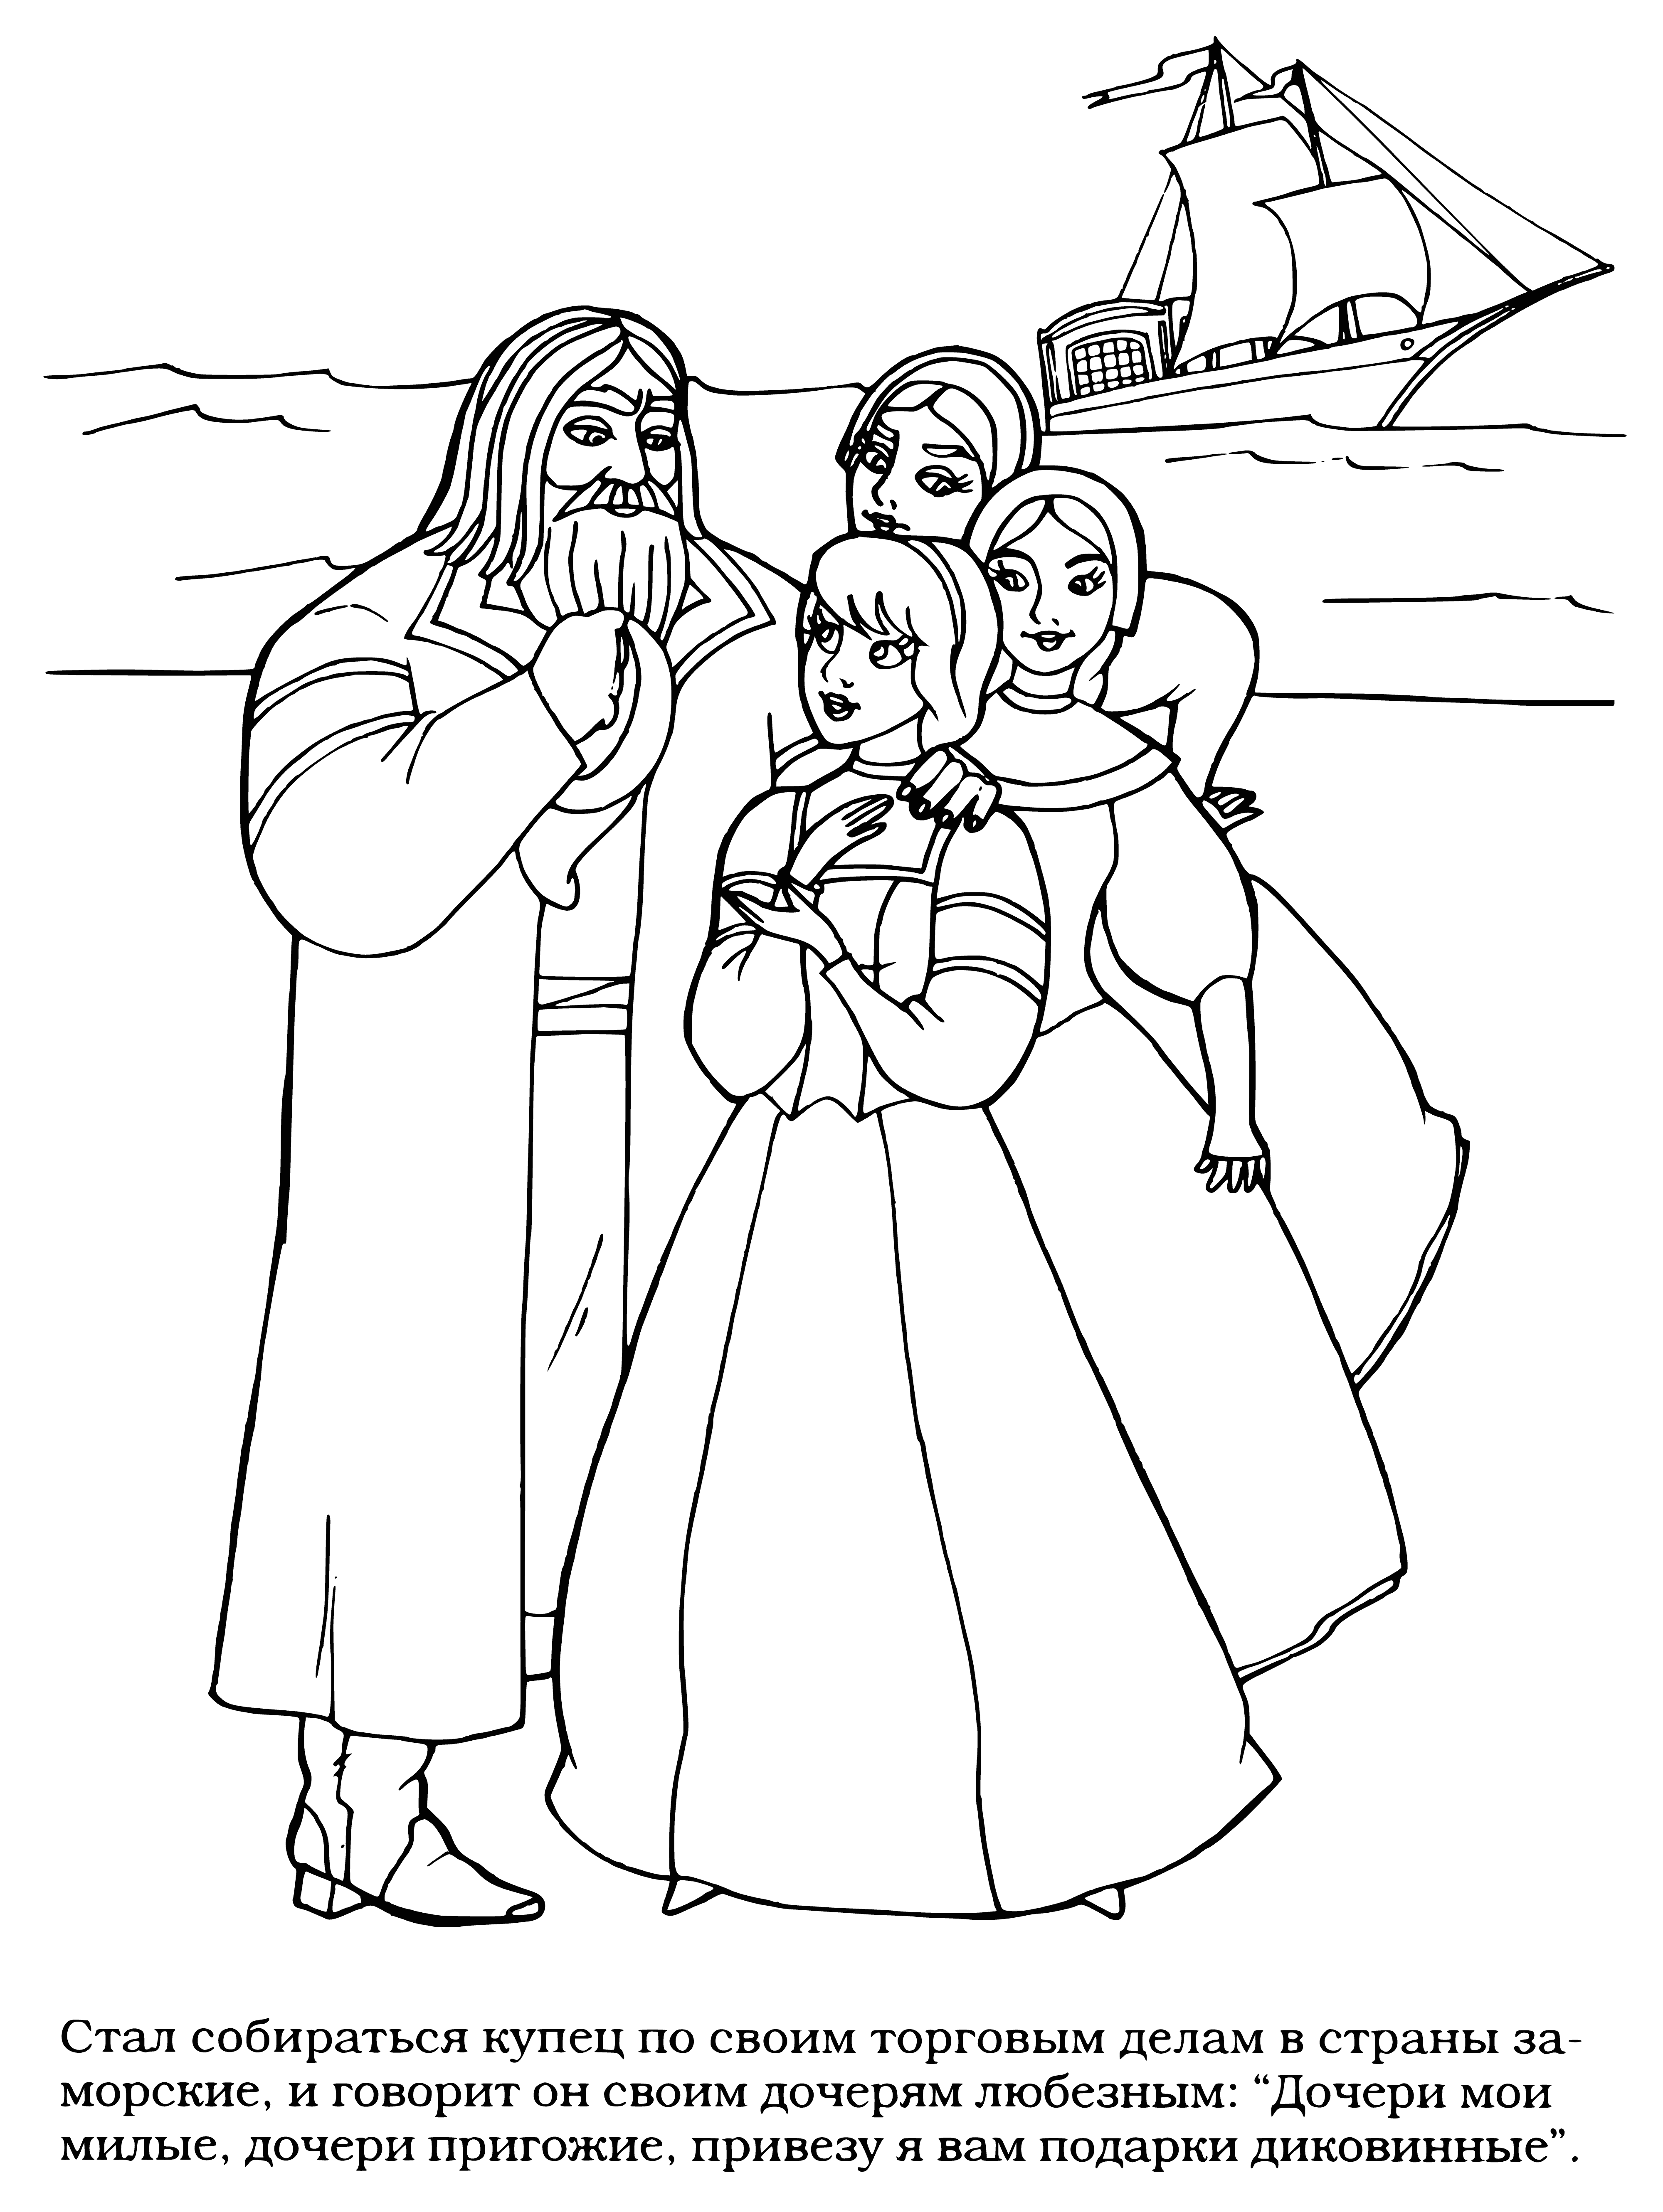 Merchant and daughters coloring page